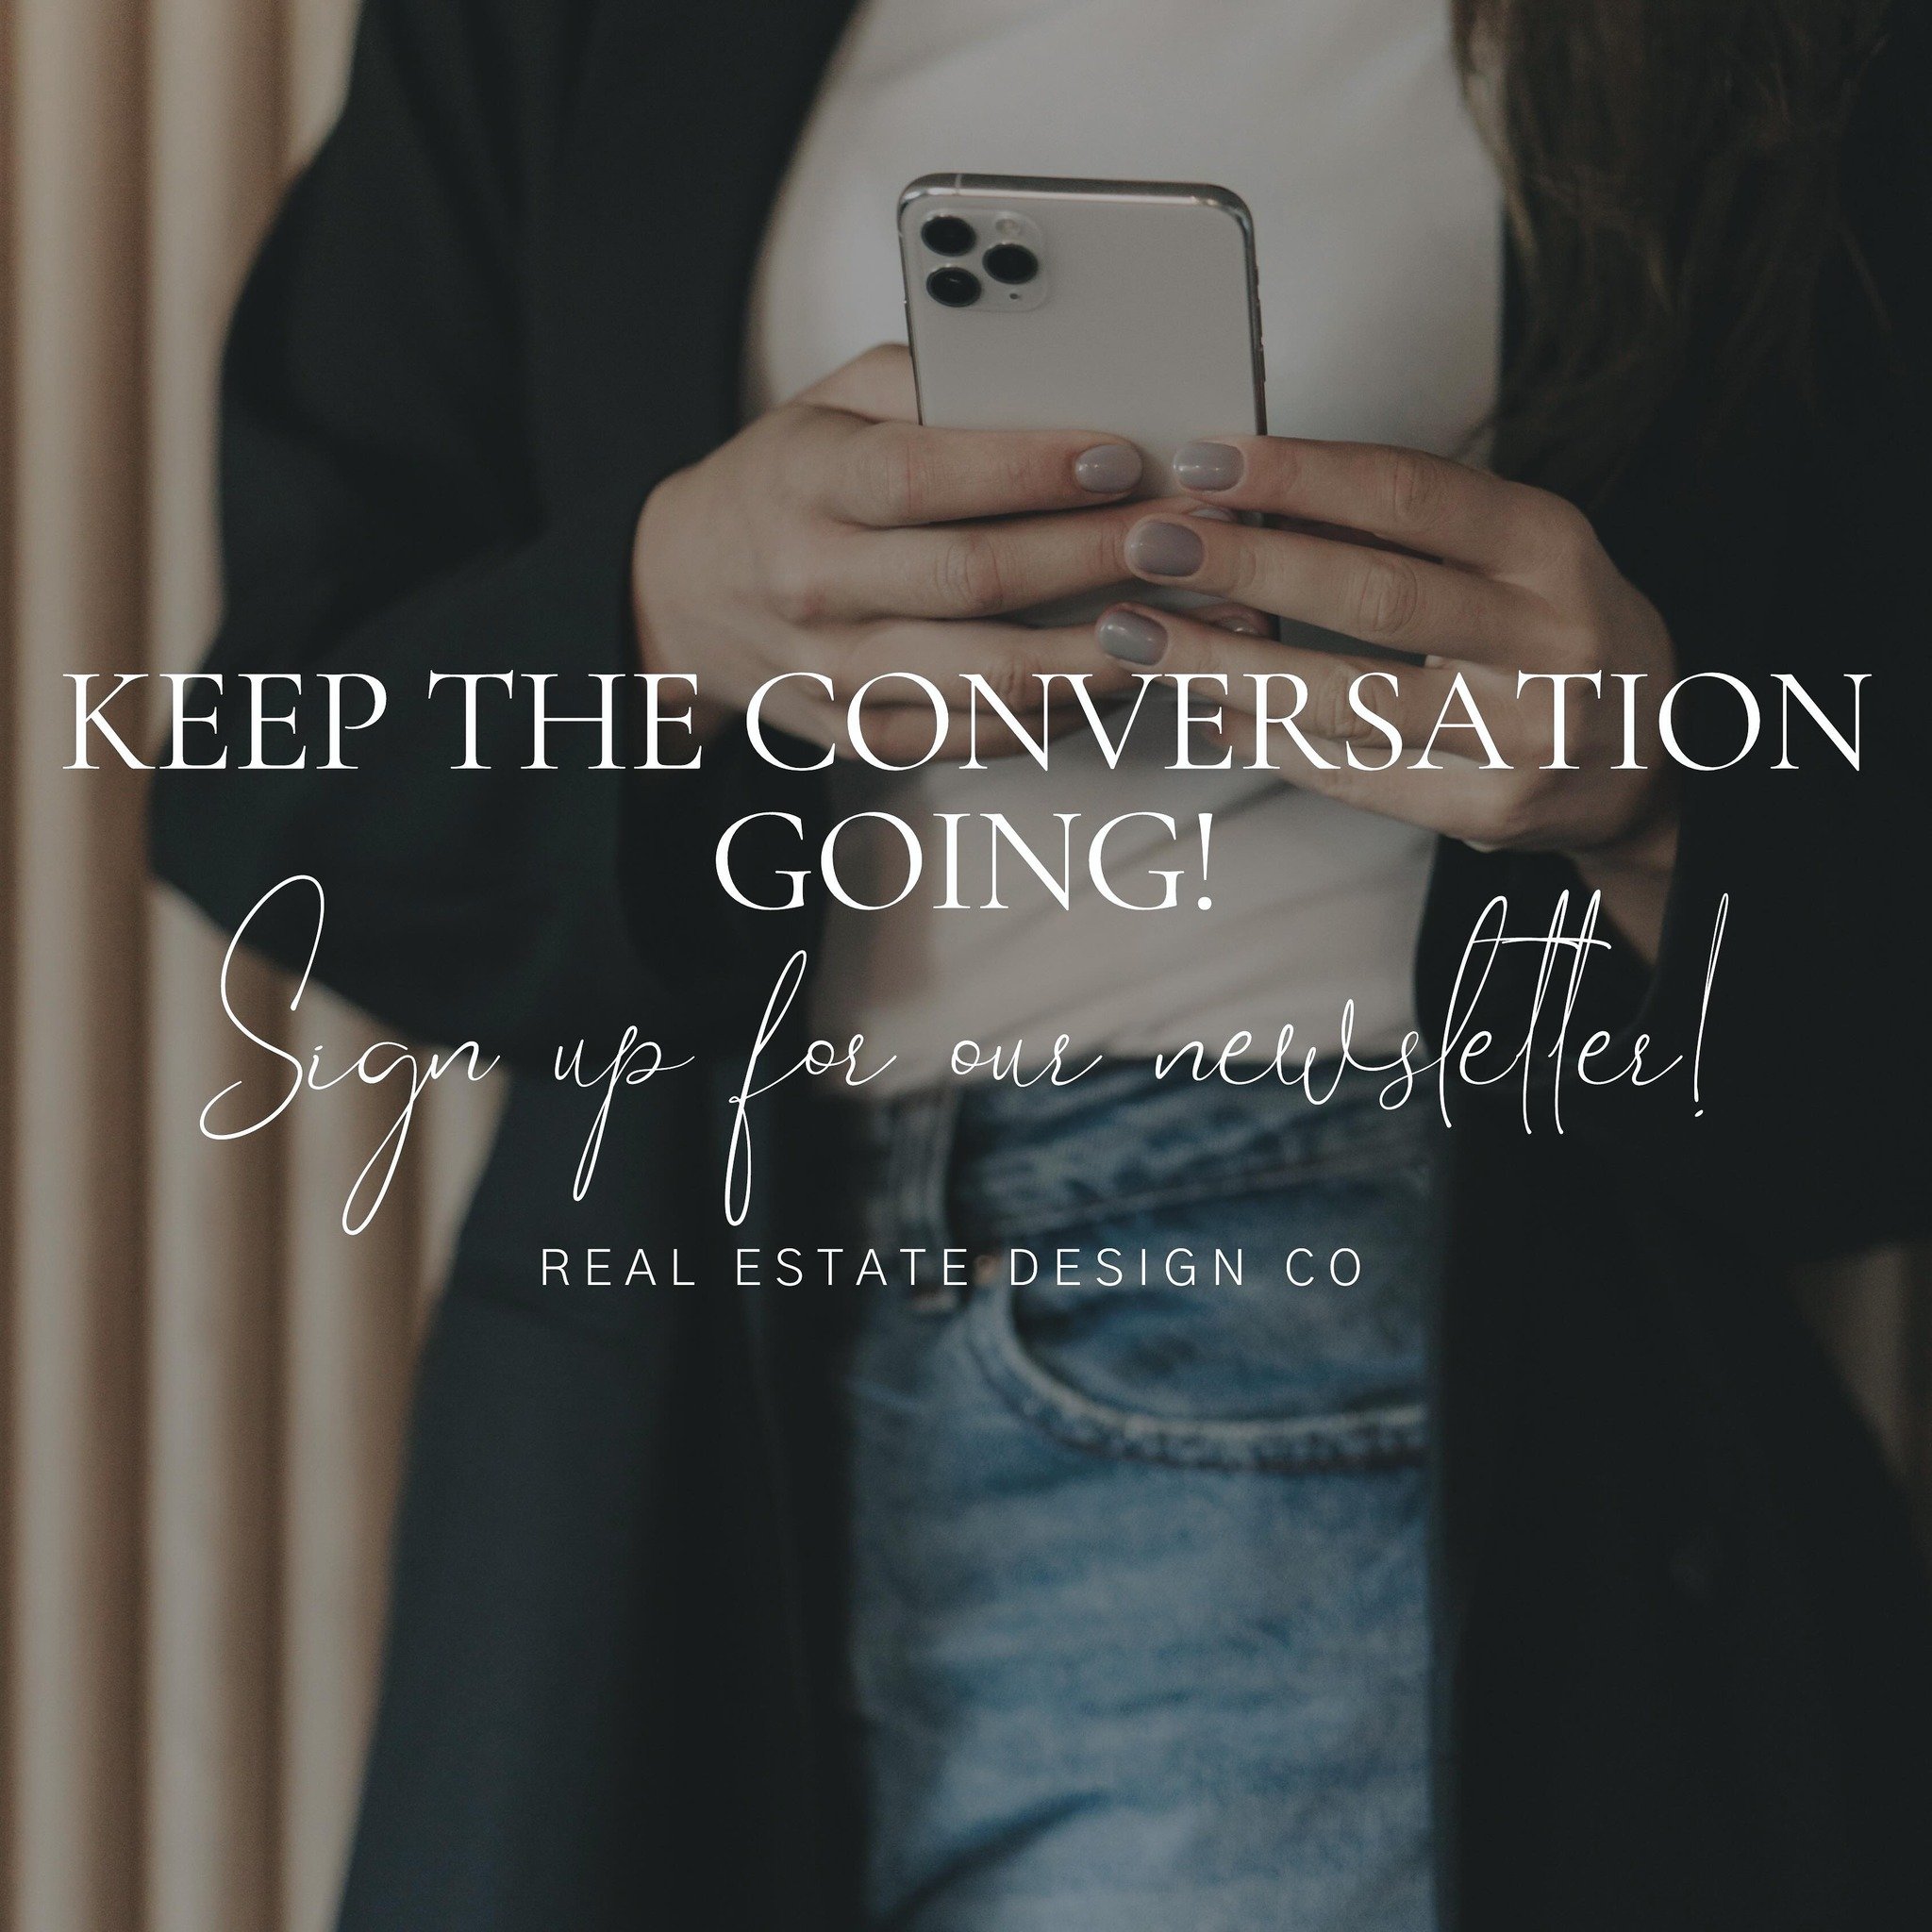 Let&rsquo;s keep the conversation going! Subscribe to our newsletter, for specials, updates, tips, inspiration, and all things real estate. Visit our website to sign up.

#realestatedesignco #stayconnected #newsletter #realestate #realtor #realtors #